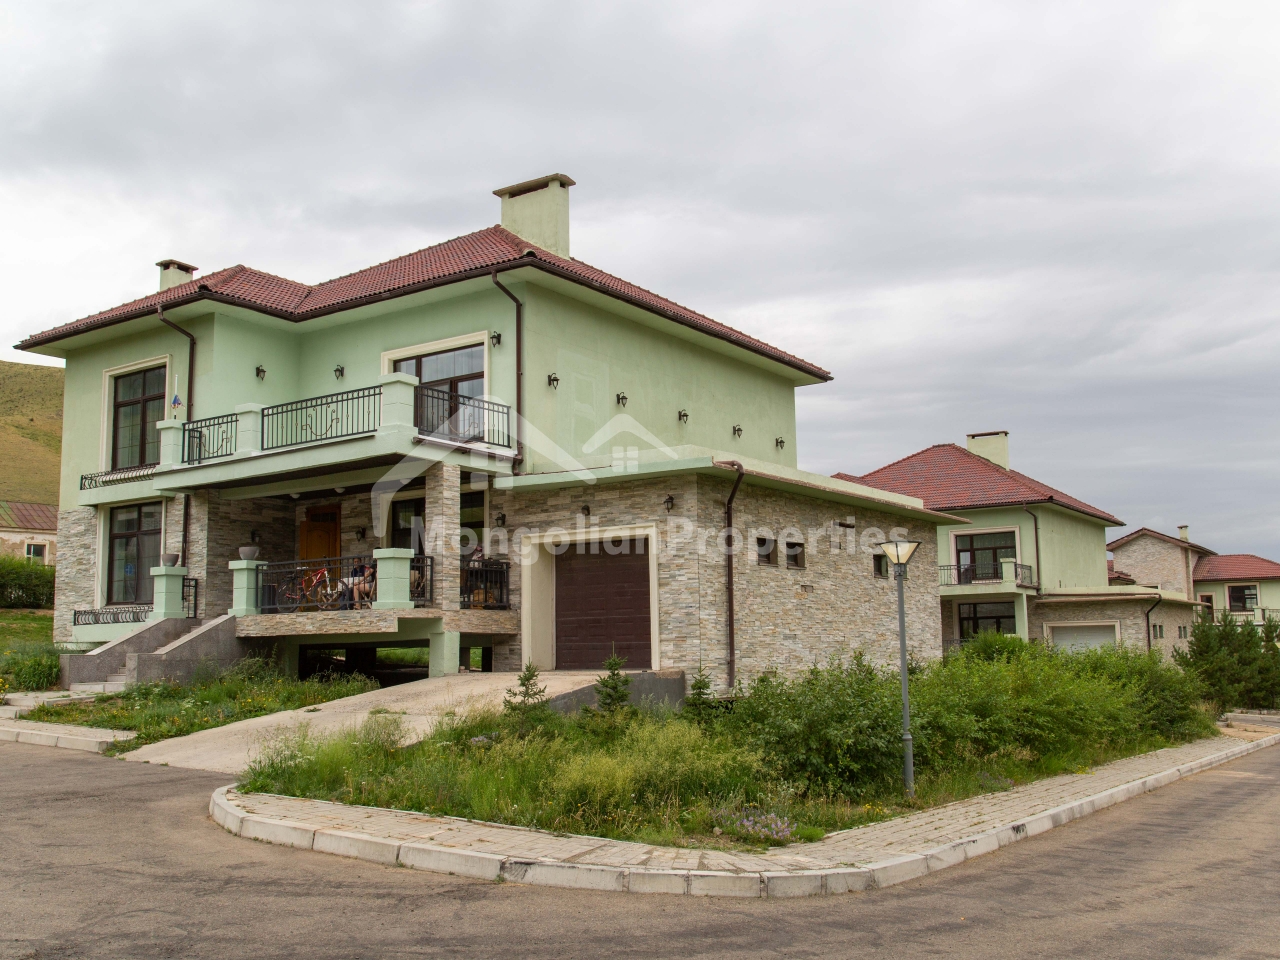 FOR SALE: Beautiful single house at Baga Tenger Valley